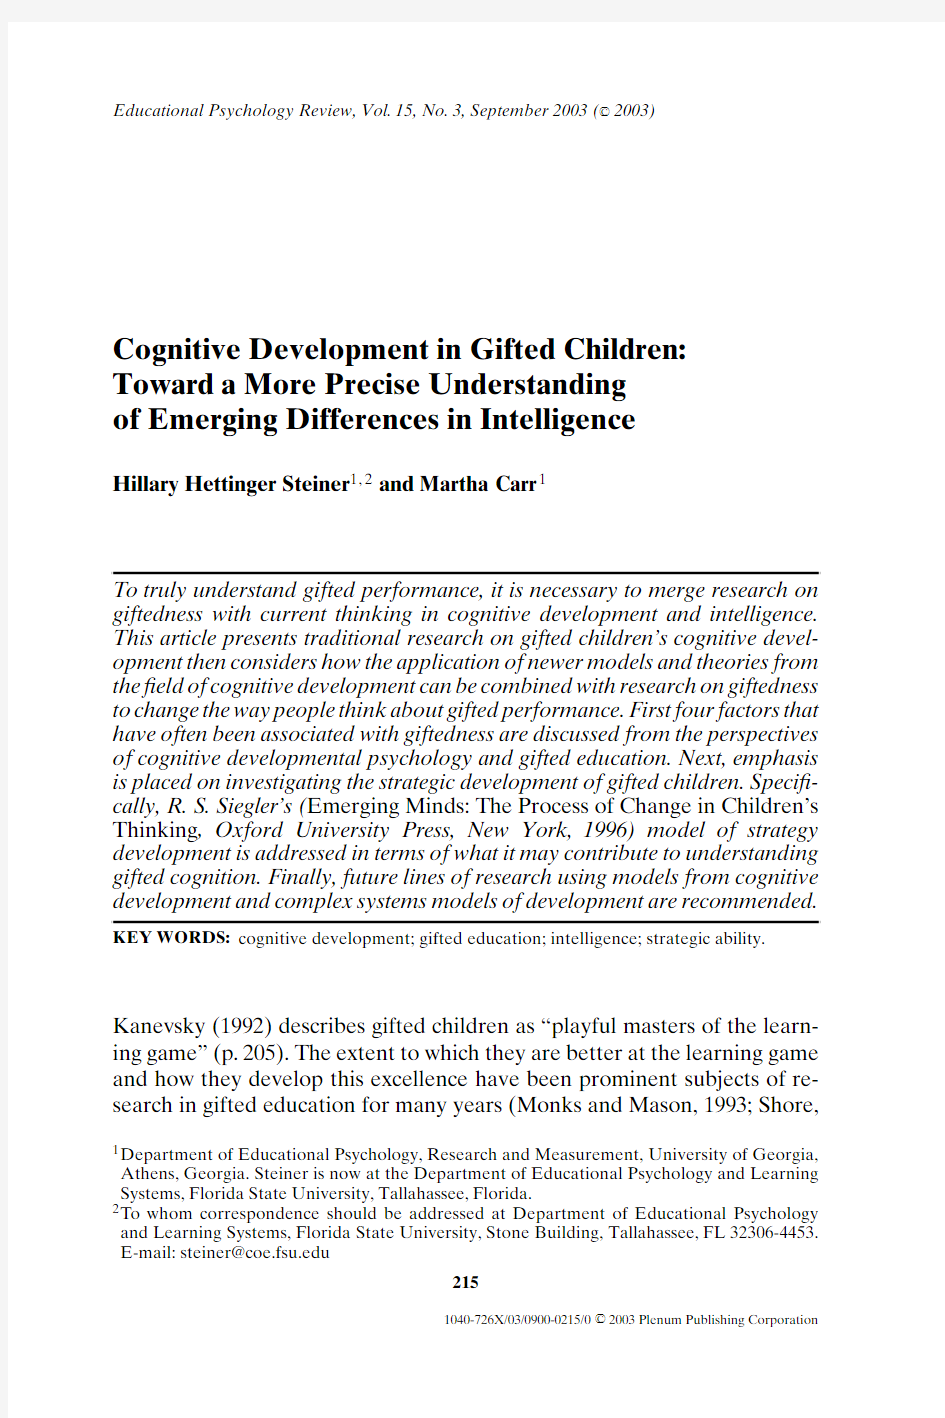 Cognitive development in gifted children